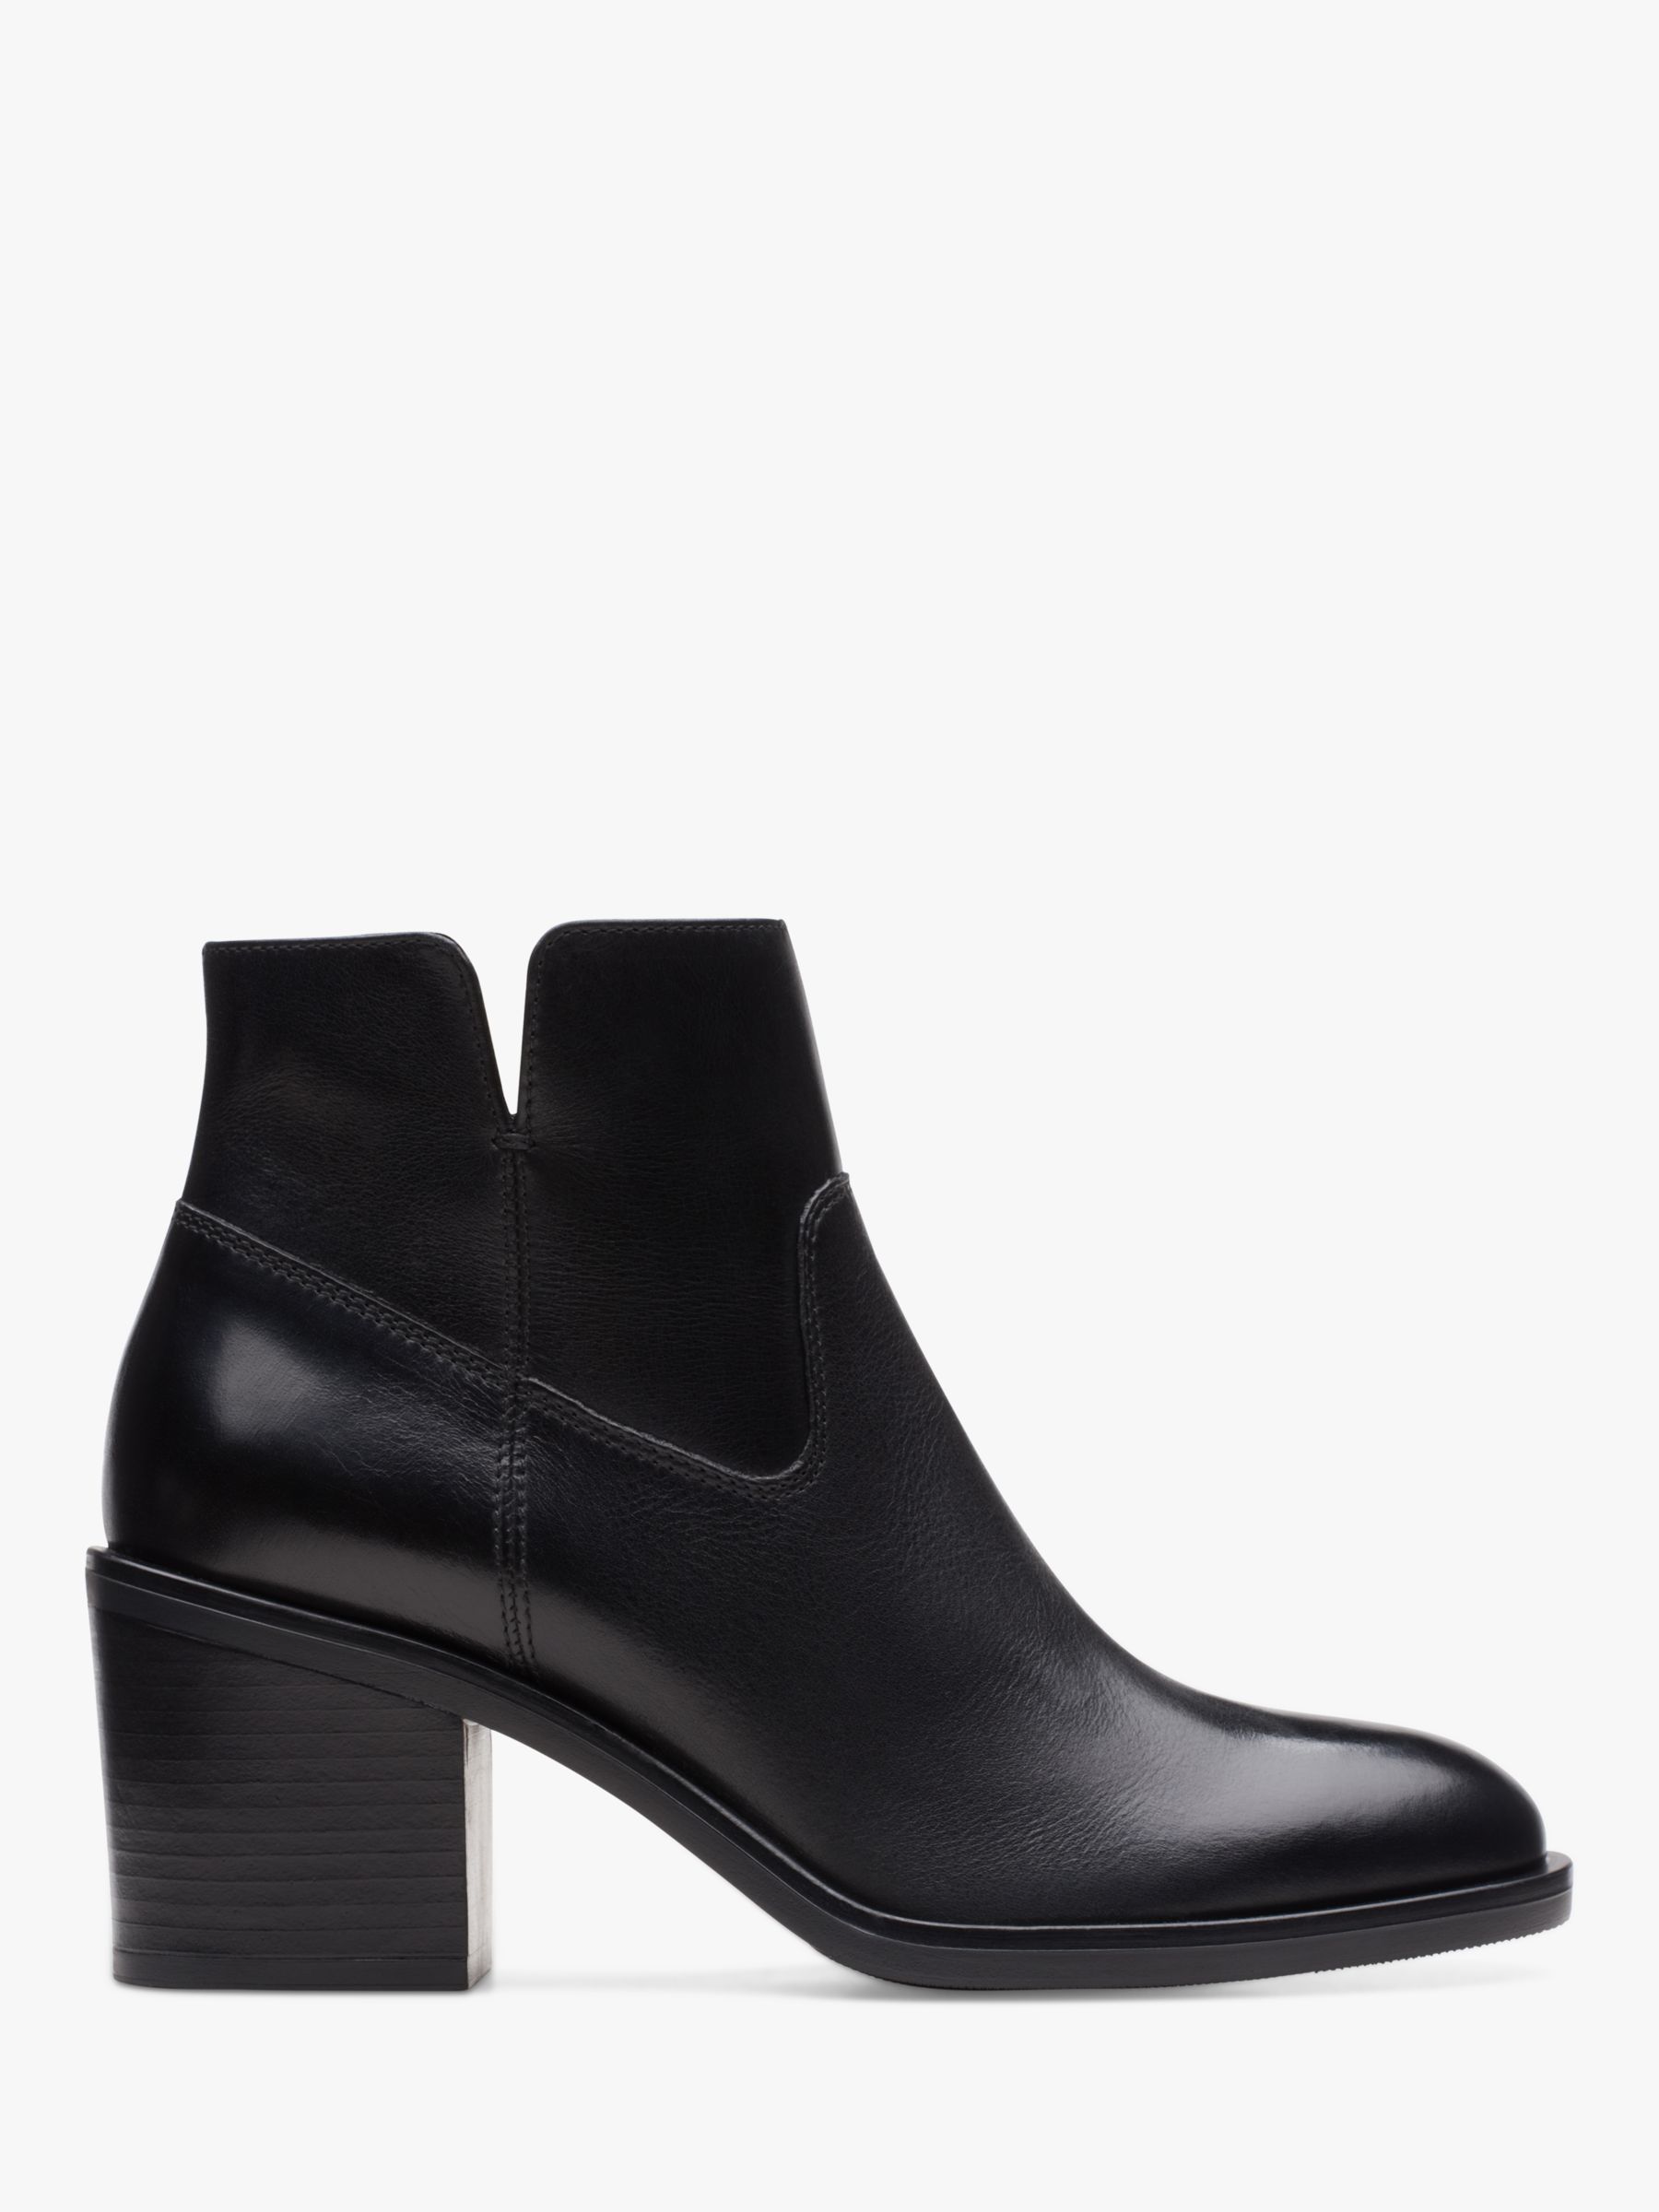 Clarks Valvestino Lo Leather Ankle Boots, Black at John Lewis & Partners